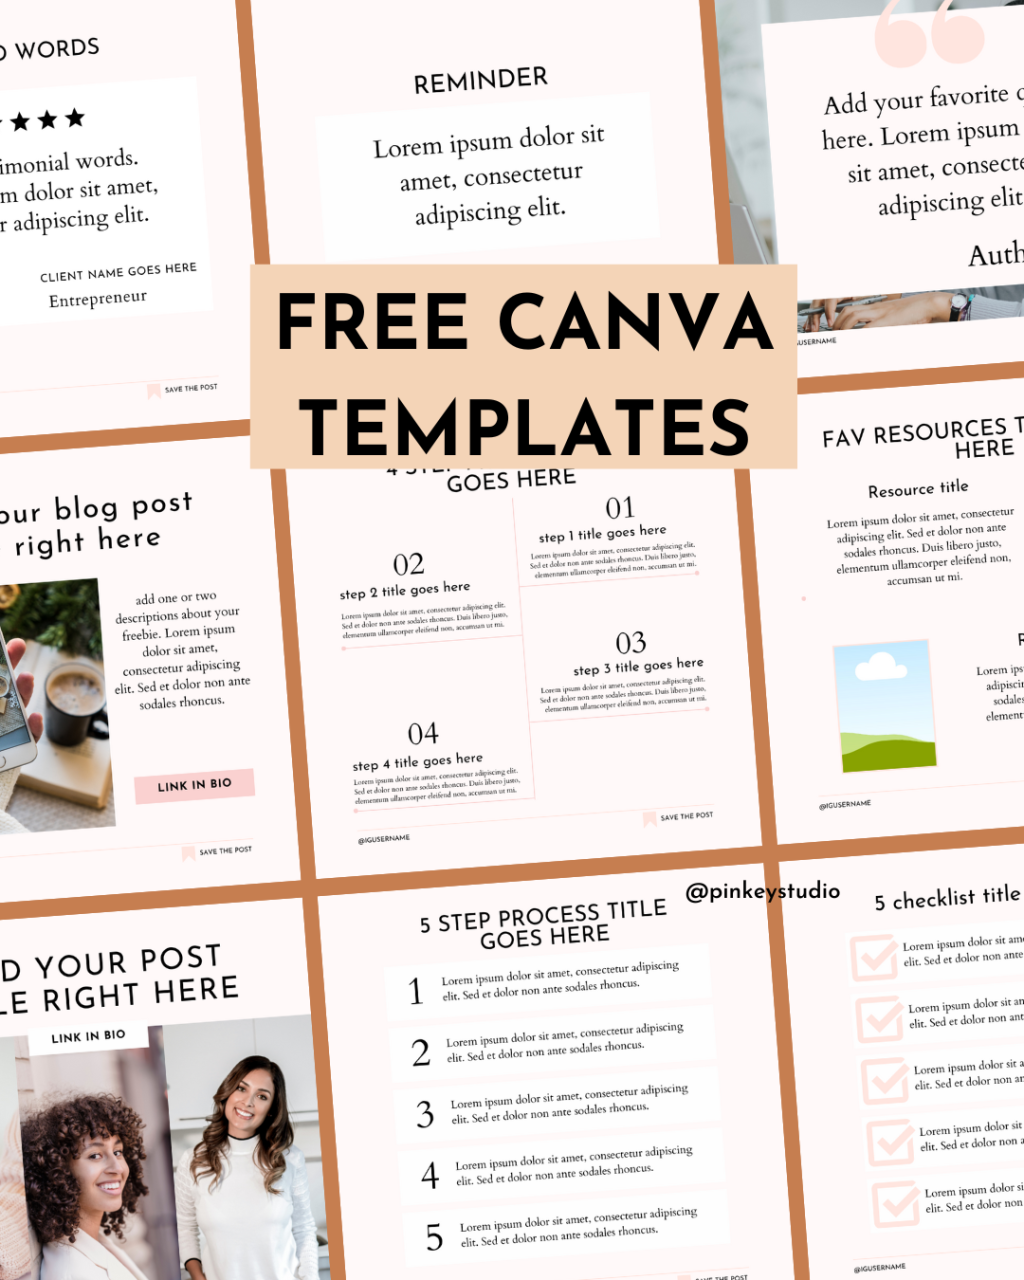 100 FREE Canva Templates For Social Media Engagement